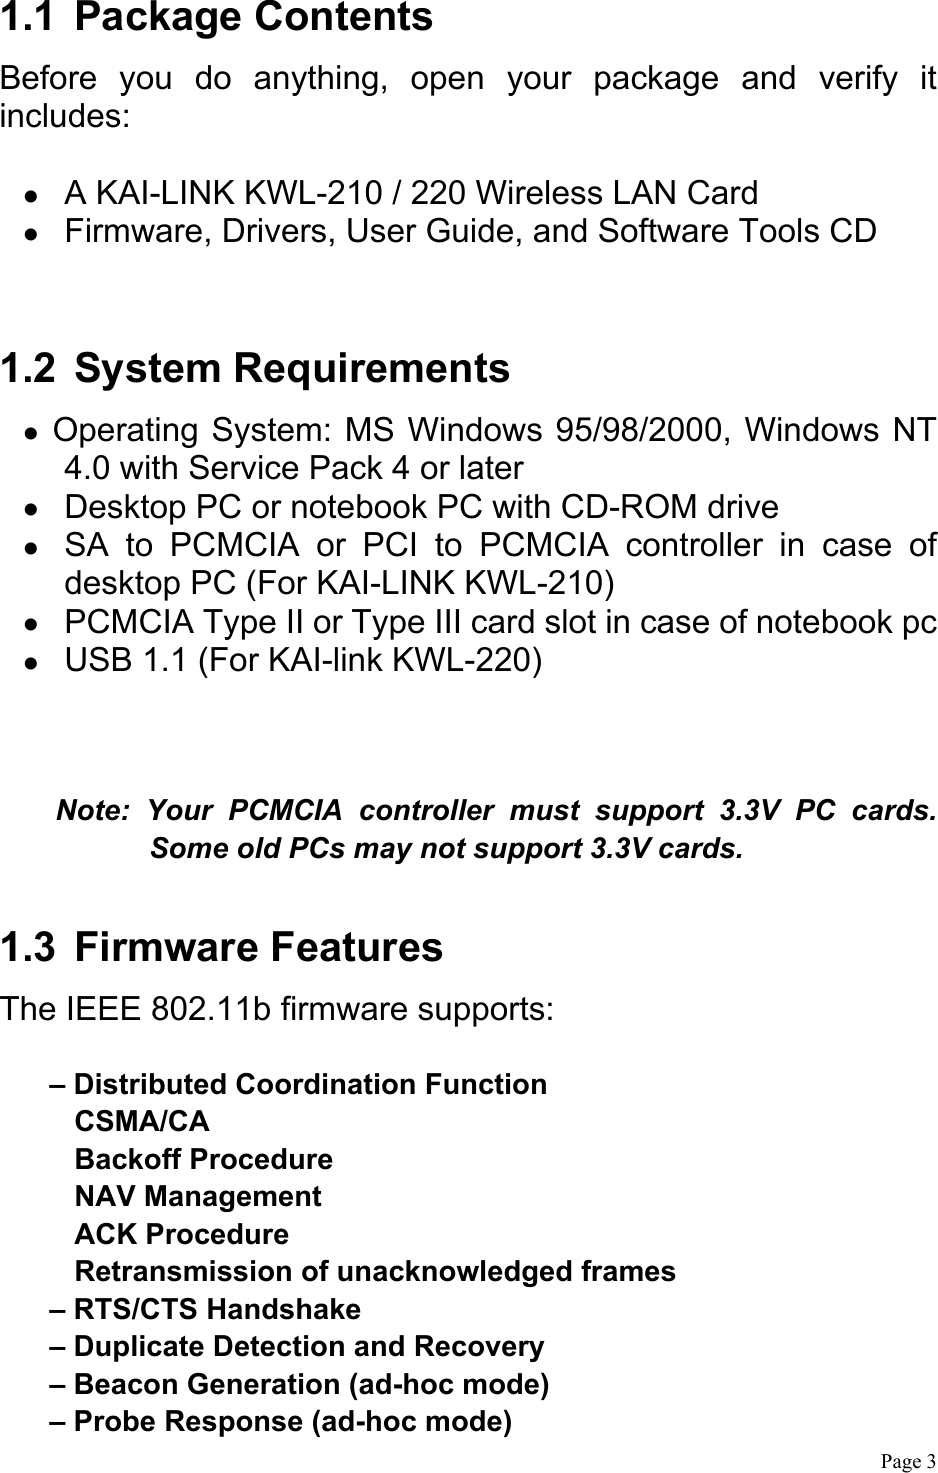  Page 3  1.1 Package Contents Before you do anything, open your package and verify it includes:    A KAI-LINK KWL-210 / 220 Wireless LAN Card     Firmware, Drivers, User Guide, and Software Tools CD  1.2 System Requirements  Operating System: MS Windows 95/98/2000, Windows NT 4.0 with Service Pack 4 or later   Desktop PC or notebook PC with CD-ROM drive   SA to PCMCIA or PCI to PCMCIA controller in case of desktop PC (For KAI-LINK KWL-210)   PCMCIA Type II or Type III card slot in case of notebook pc     USB 1.1 (For KAI-link KWL-220)   Note: Your PCMCIA controller must support 3.3V PC cards. Some old PCs may not support 3.3V cards.  1.3 Firmware Features The IEEE 802.11b firmware supports:  – Distributed Coordination Function CSMA/CA Backoff Procedure NAV Management ACK Procedure Retransmission of unacknowledged frames – RTS/CTS Handshake – Duplicate Detection and Recovery – Beacon Generation (ad-hoc mode) – Probe Response (ad-hoc mode) 